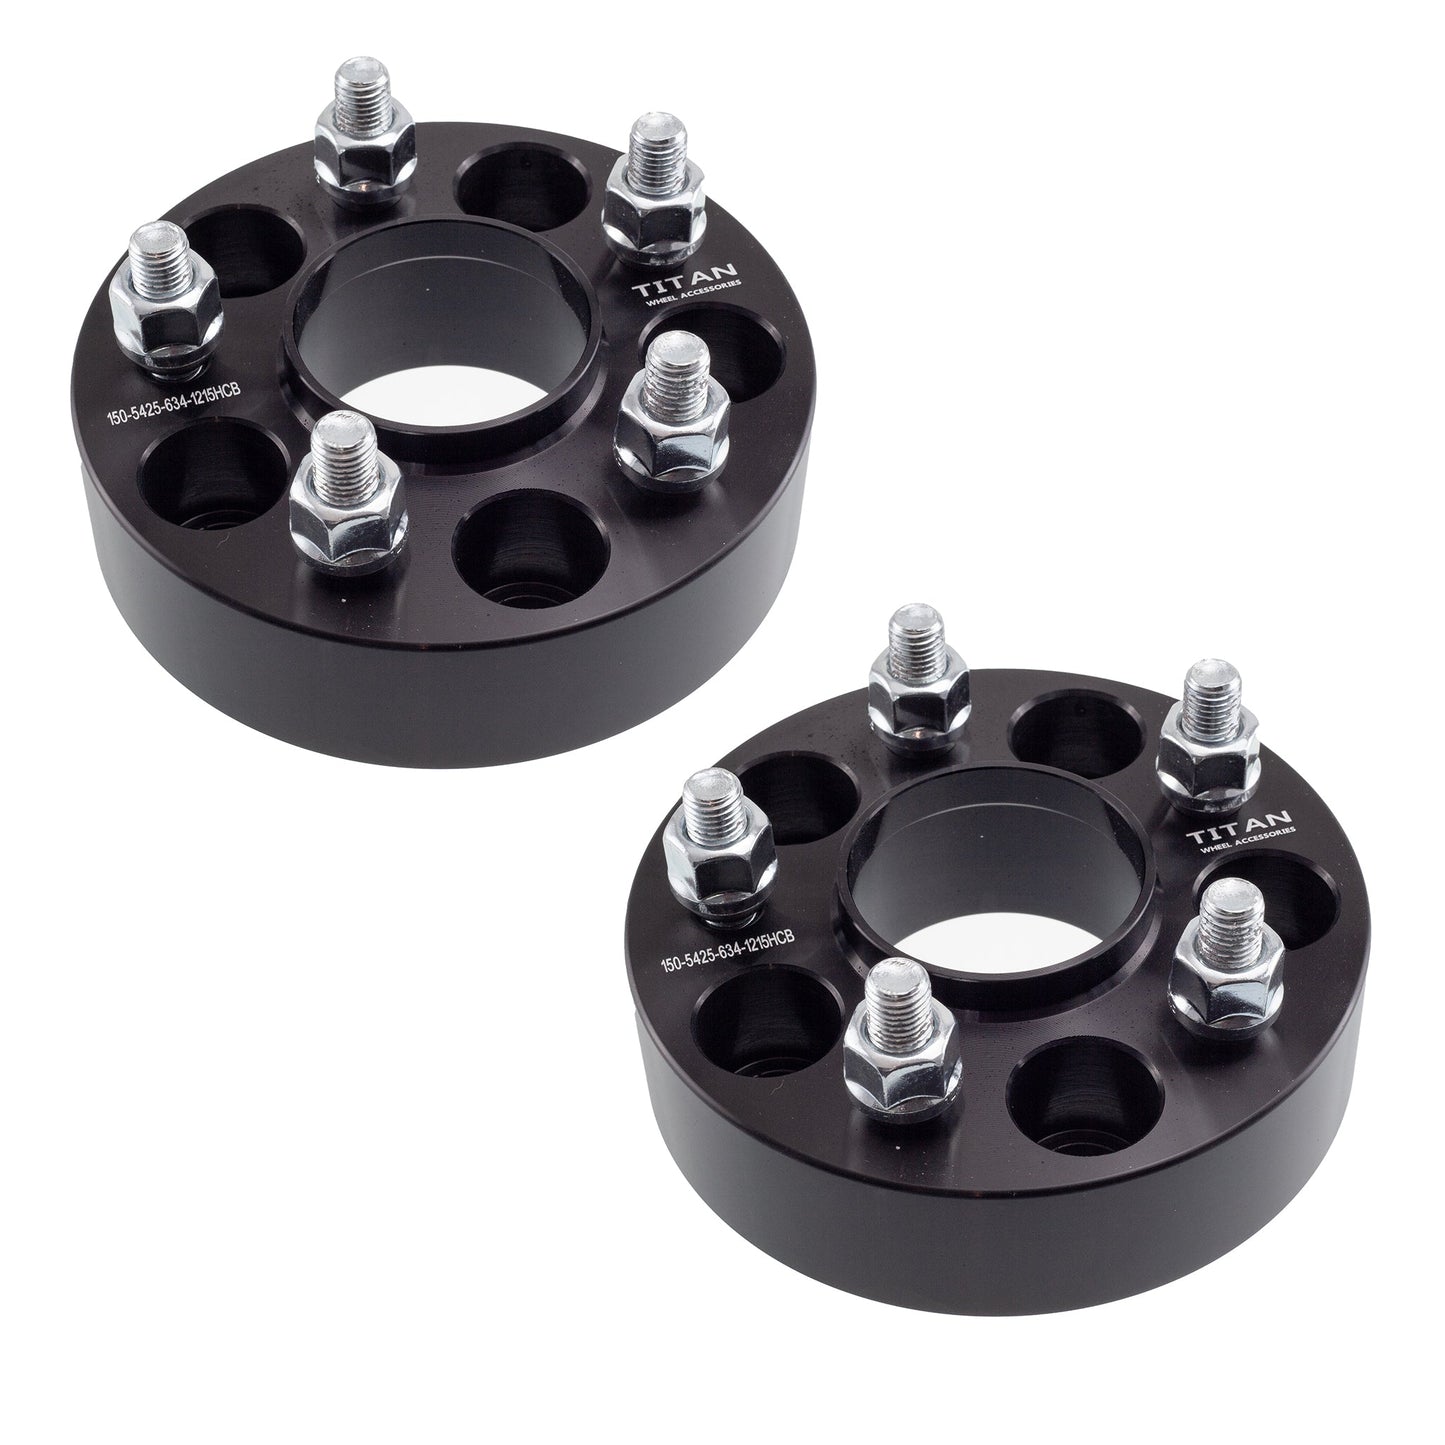 1.5" (38mm) Titan Wheel Spacers for Ford Bronco Sport Escape | 5x4.25 (5x108) | 63.4 Hubcentric | 12x1.5 Studs |  Set of 4 | Titan Wheel Accessories